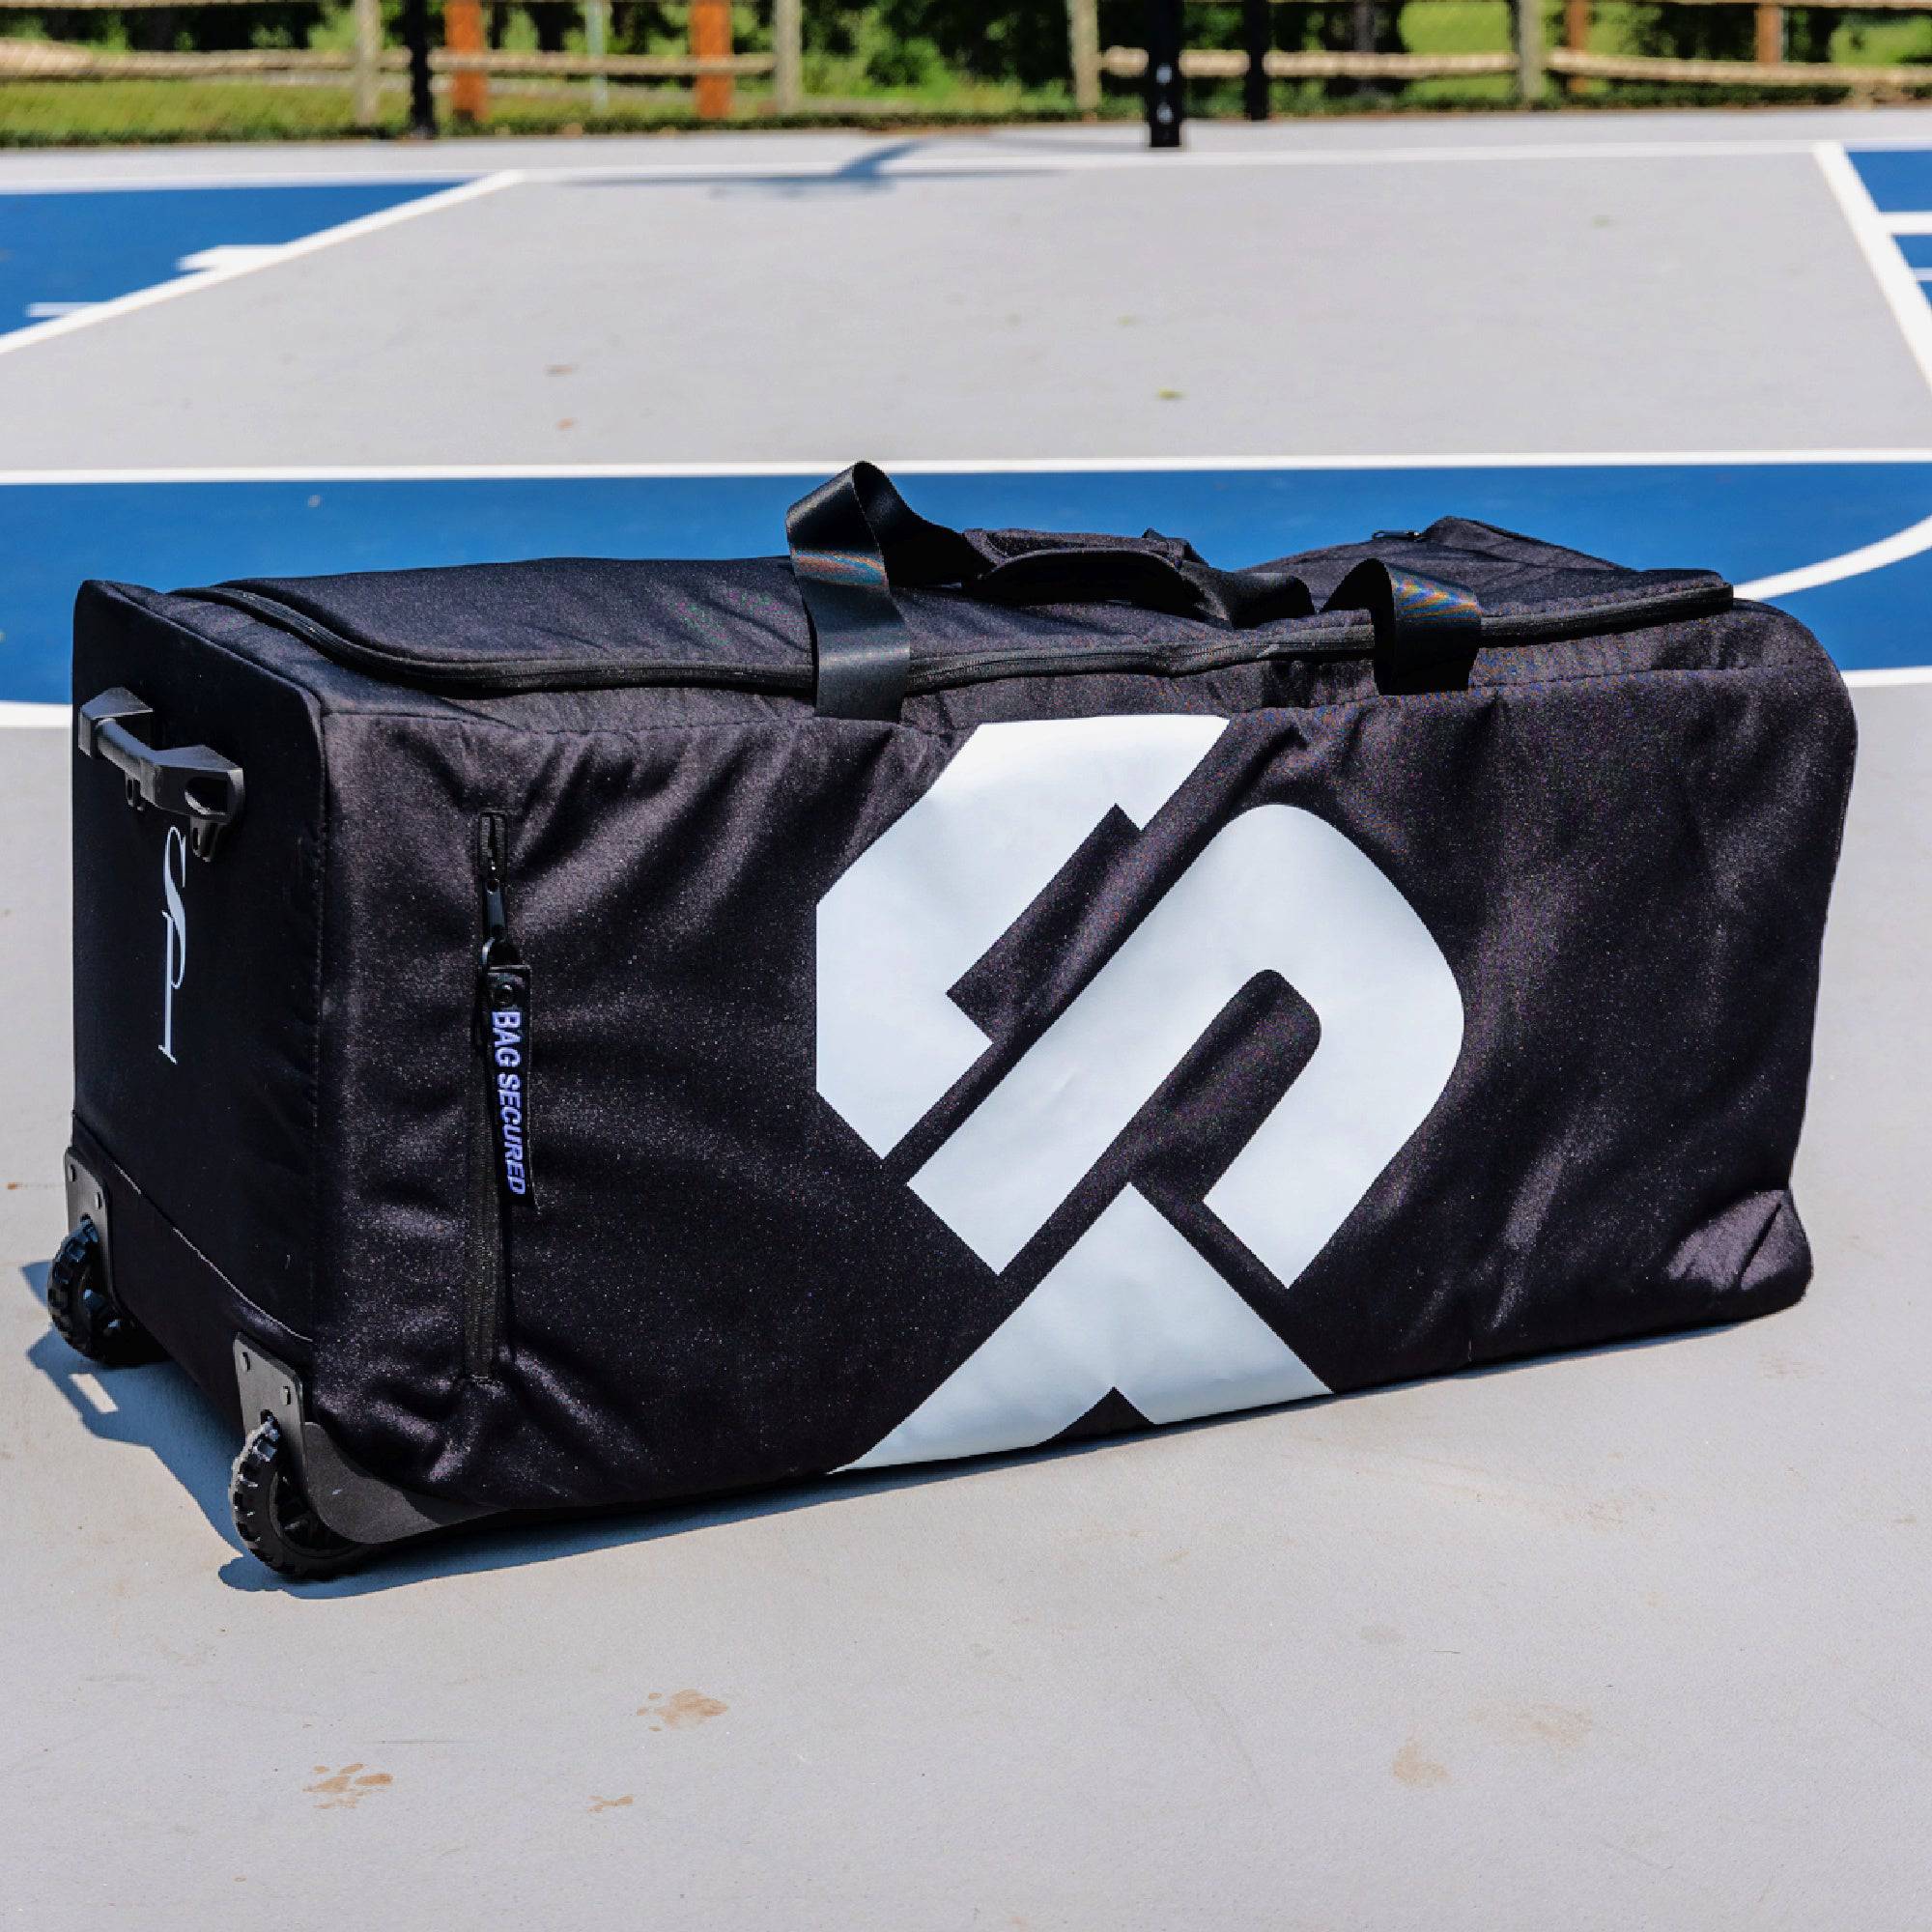 Sports Equipment Carrier With Wheels (Holds 18-20 Pairs of Shoes)